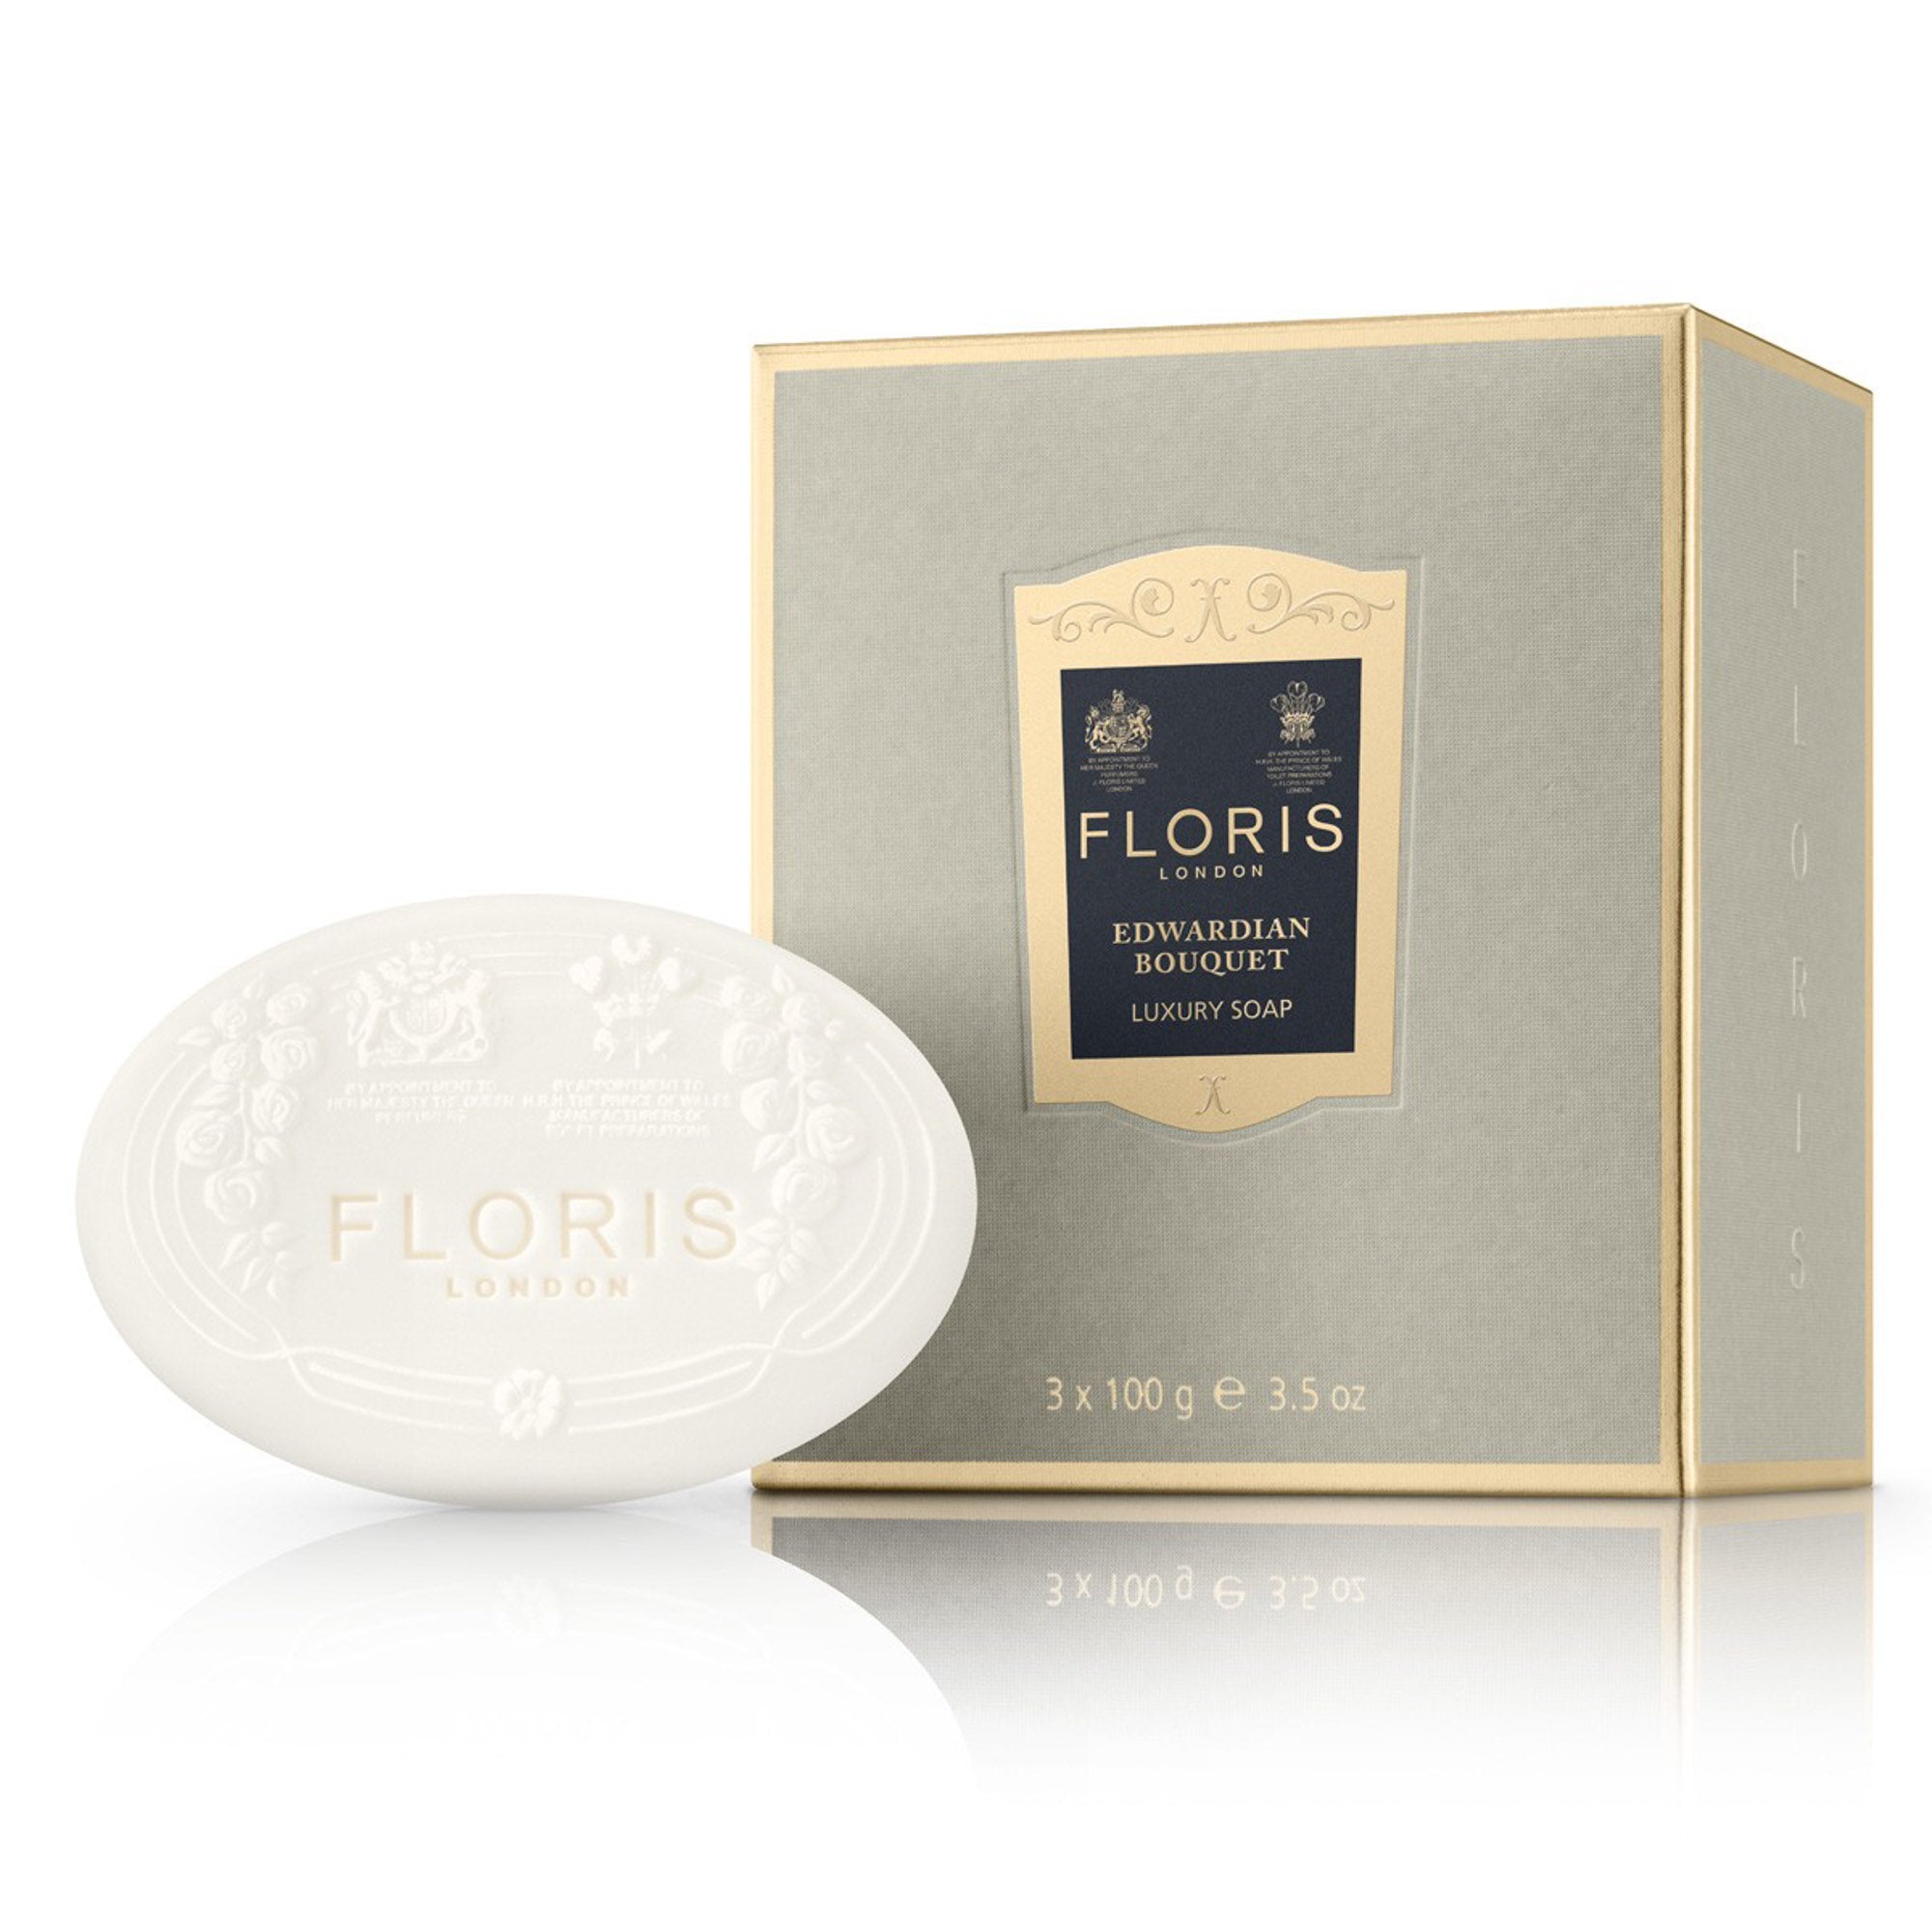 KirbyAllison.com's FLORIS Edwardian Bouquet Luxury Soap with a luxurious box in front.